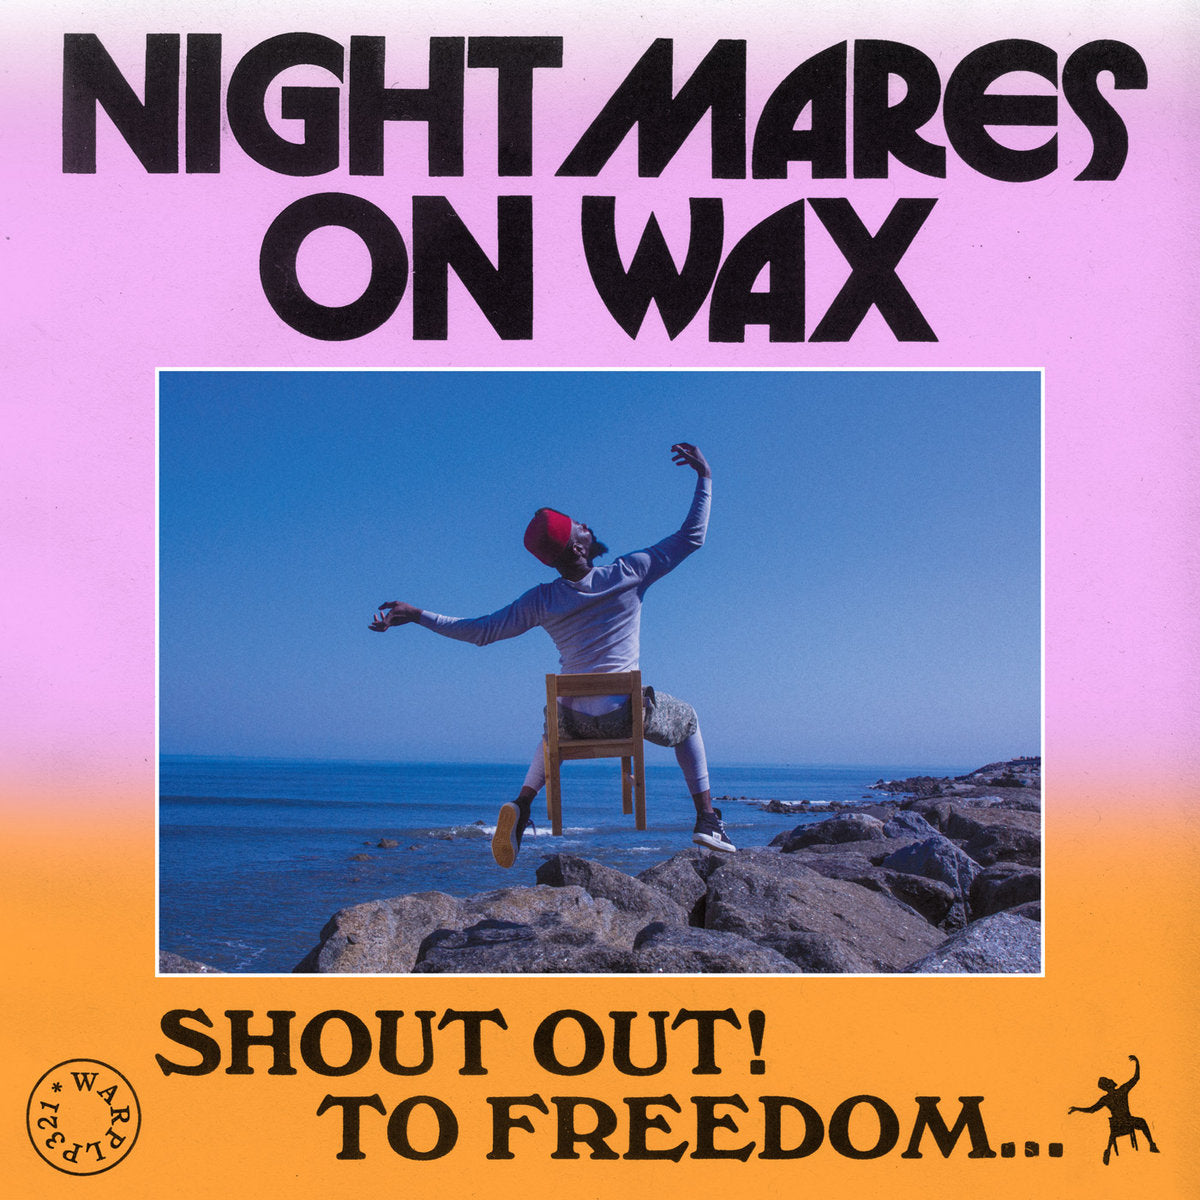 Nightmares On Wax - Shout Out! To Freedom... [blue vinyl]